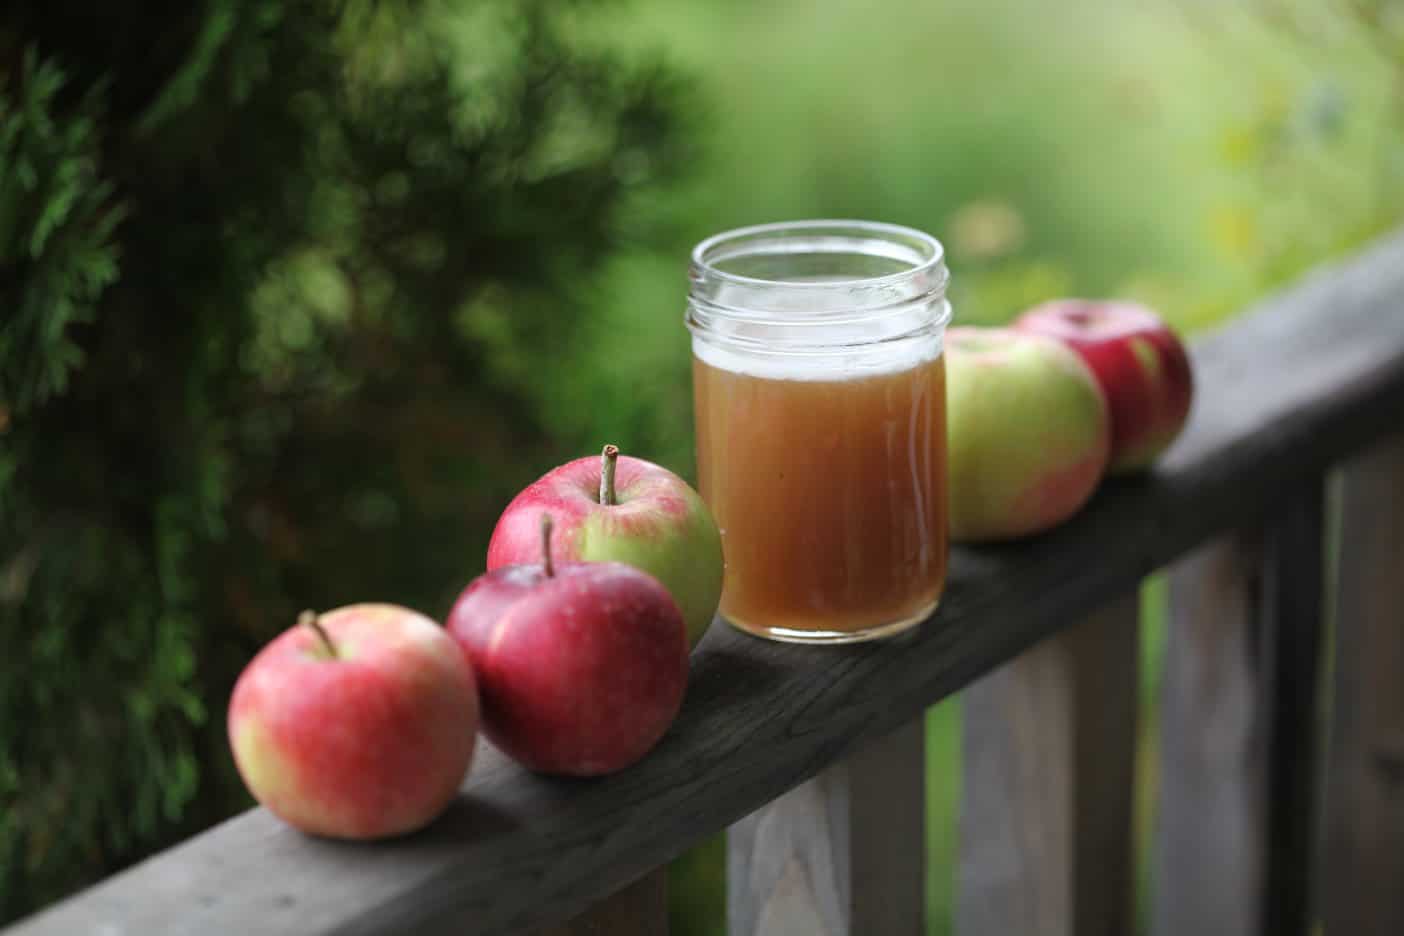 How To Make Apple Cider With A Press